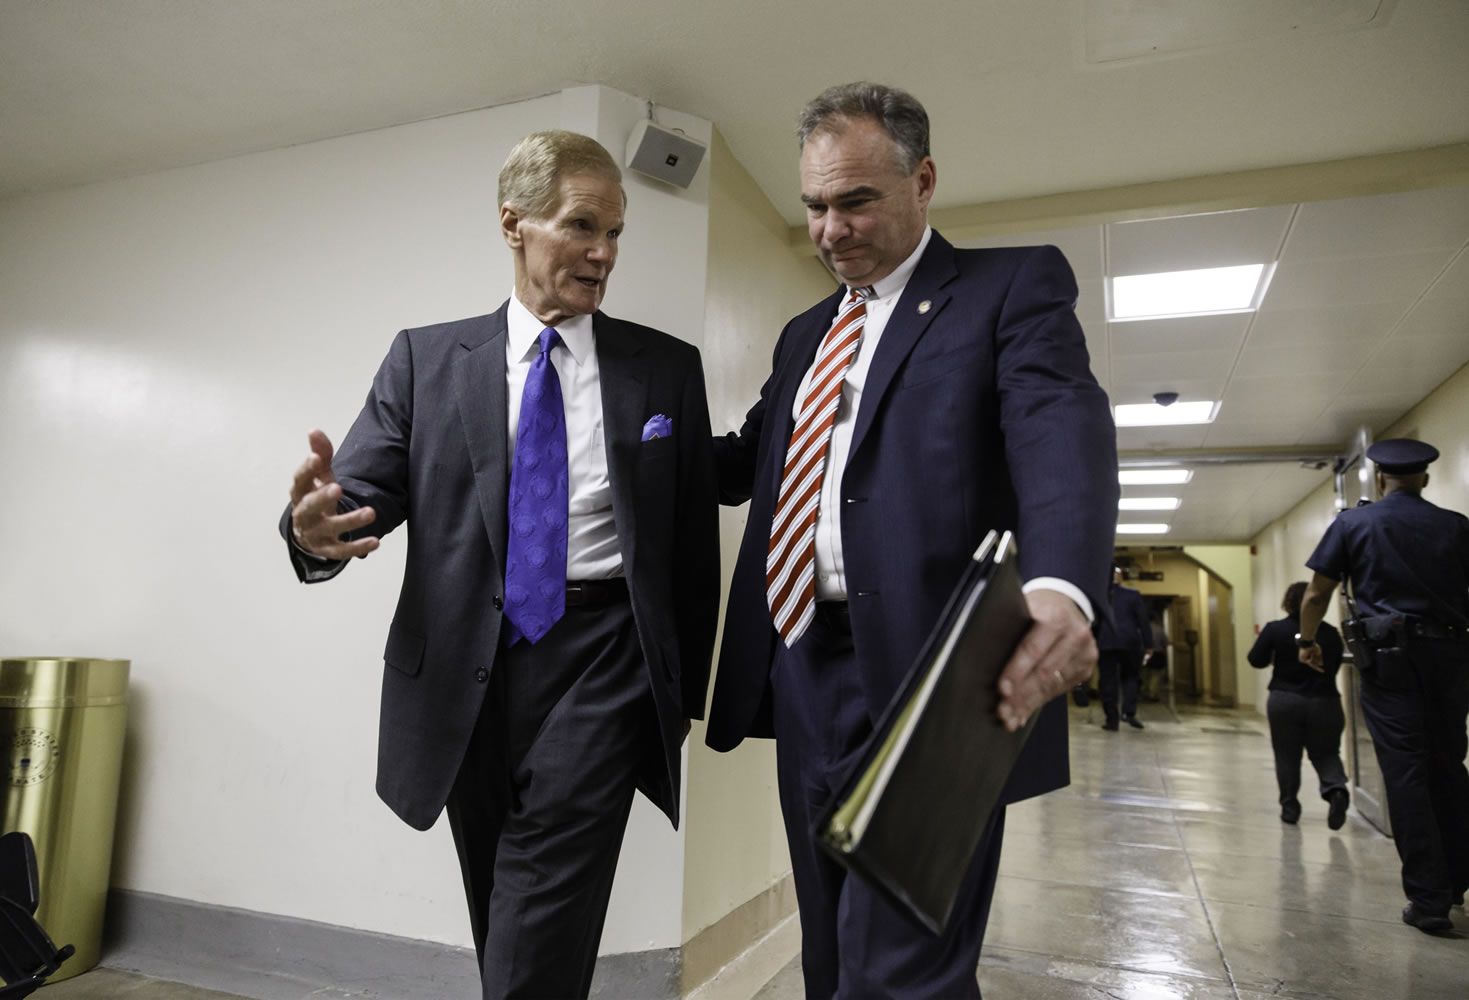 Bill Nelson, D-Fla., left, and Sen. Tim Kaine, D-Va., right, leave the Senate after a series of votes to confirm federal judicial appointees at the Capitol in Washington on Tuesday, June 3, 2014.